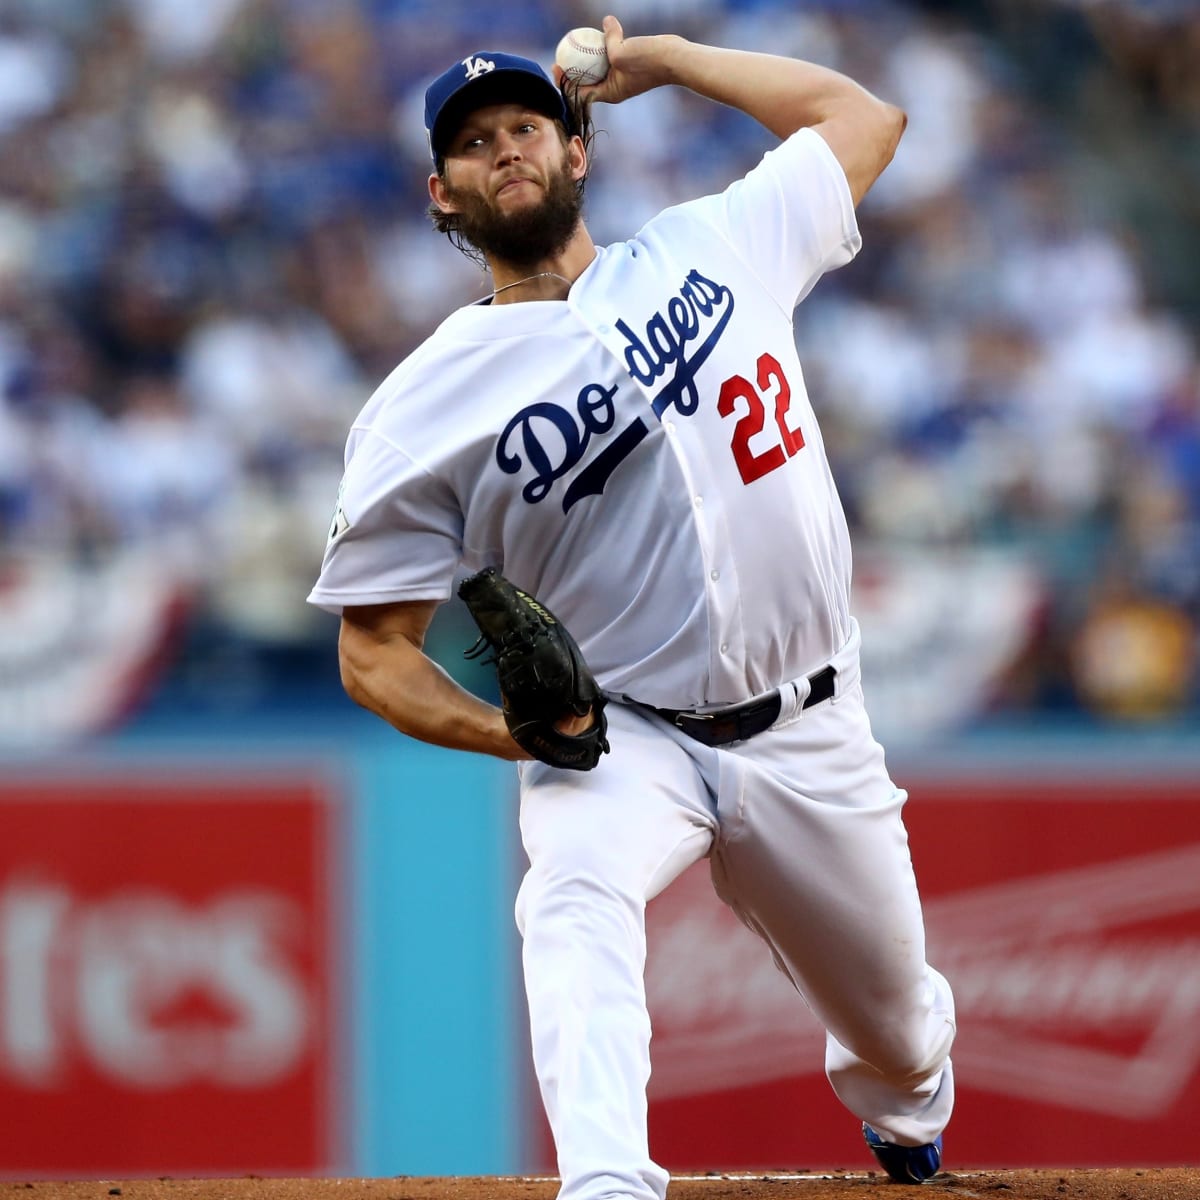 Clayton Kershaw strikes out 11 to lift Dodgers over Astros, 3-1